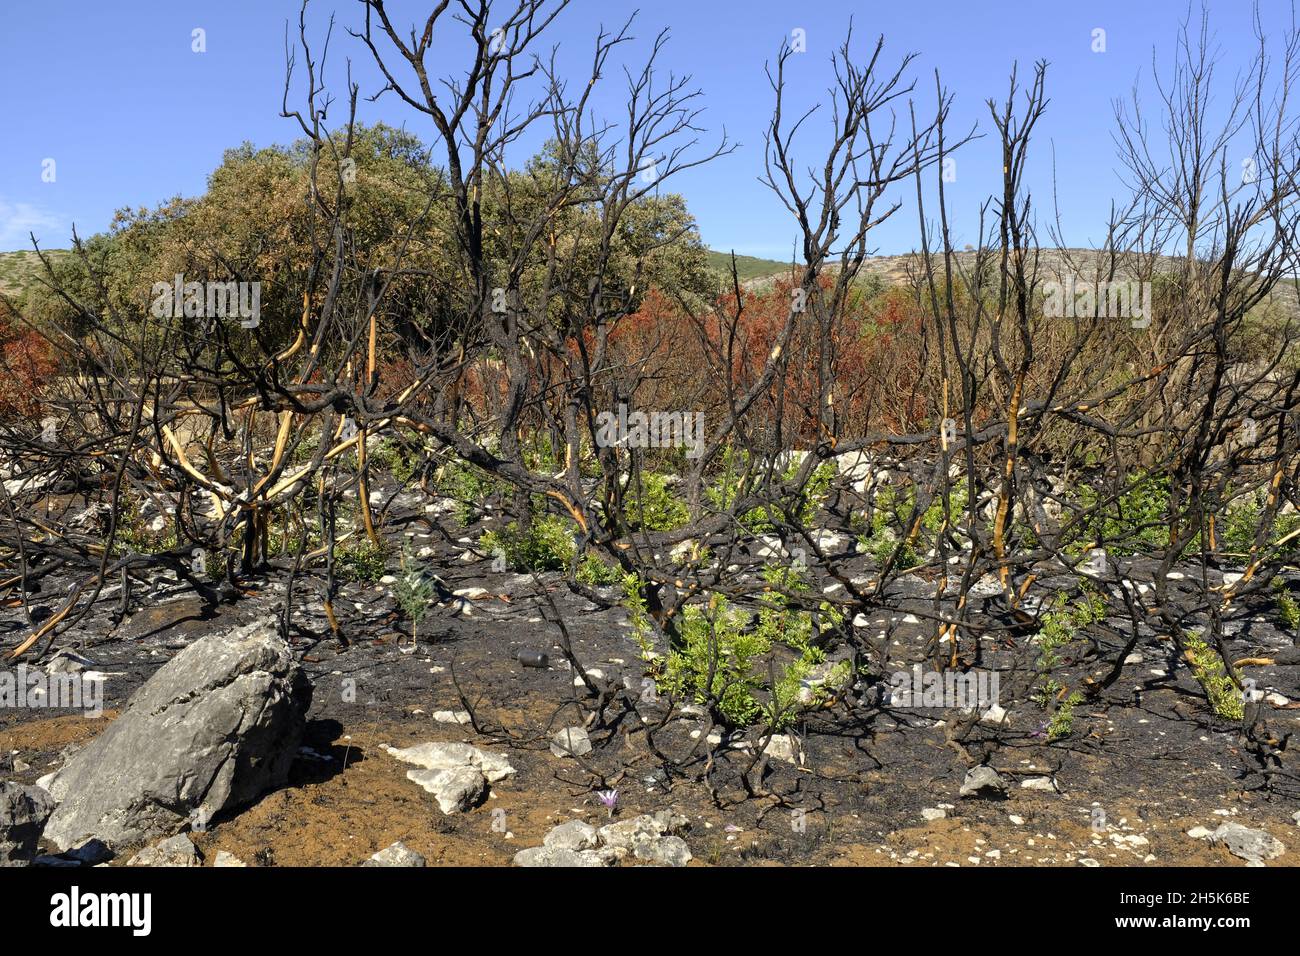 Regrowth of plants 3 months after a summer wildfire in the Algar region of the Sierras Subbeticas Natural Park, Cordoba Province, Andalucia, Spain Stock Photo